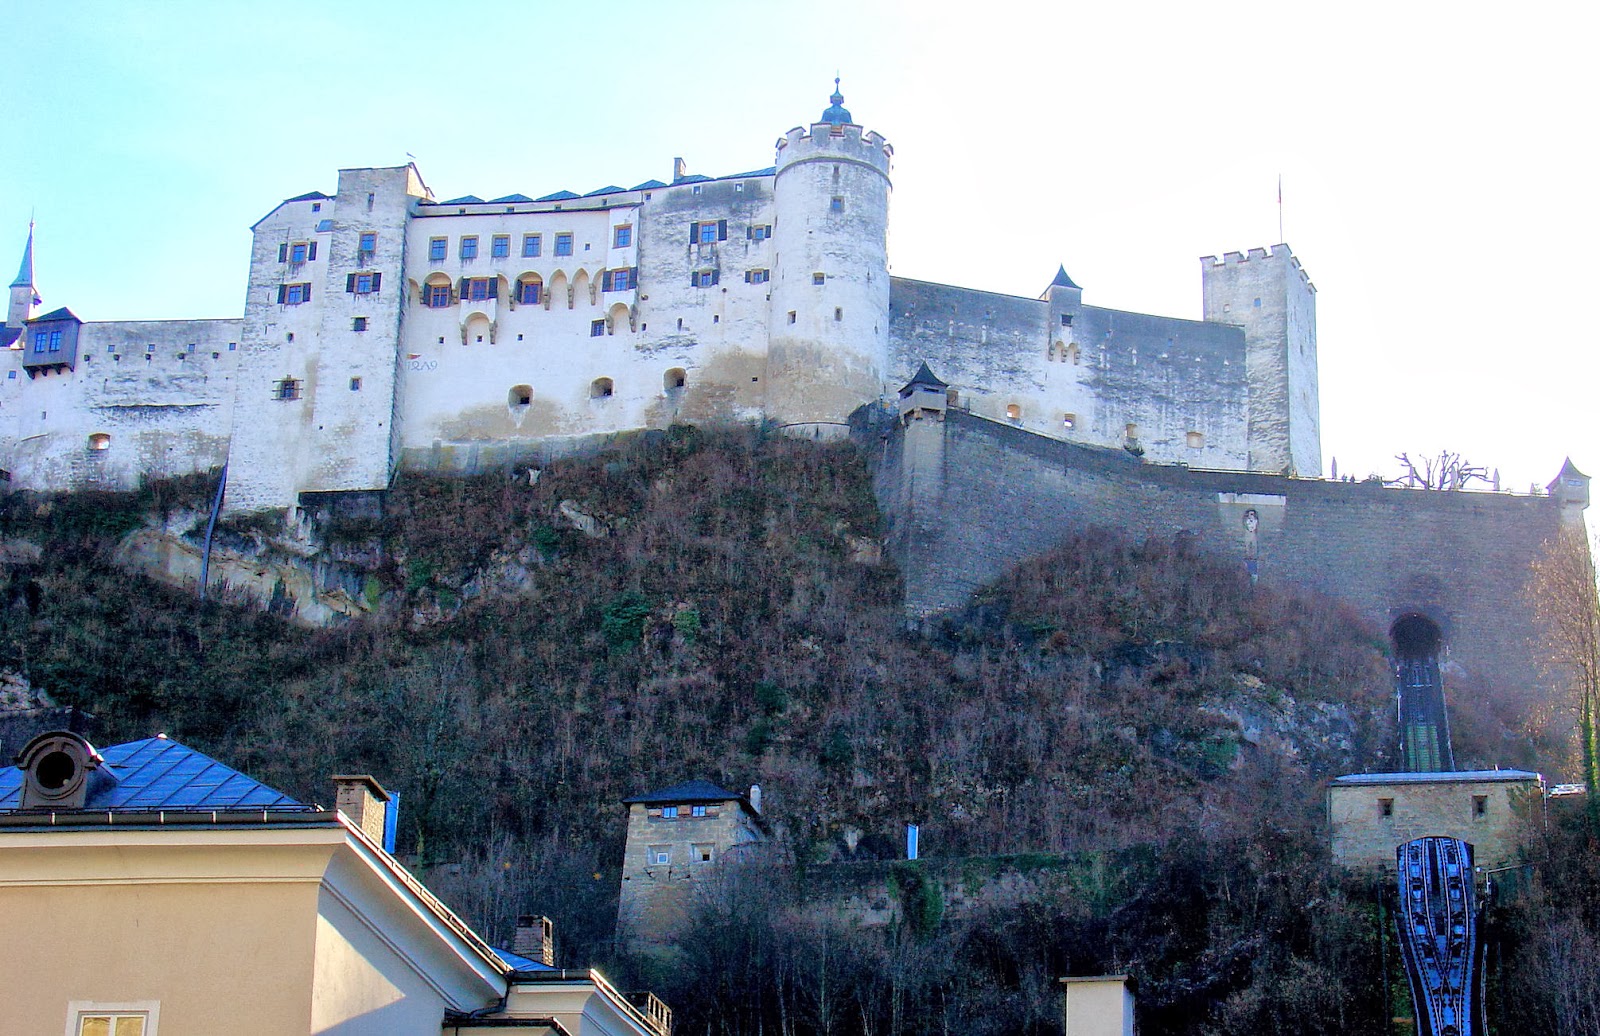 The magnificent Festung Hohensalzburg or Salzburg Castle houses three museums and can be reached via the funicular seen above and to the right of the image.